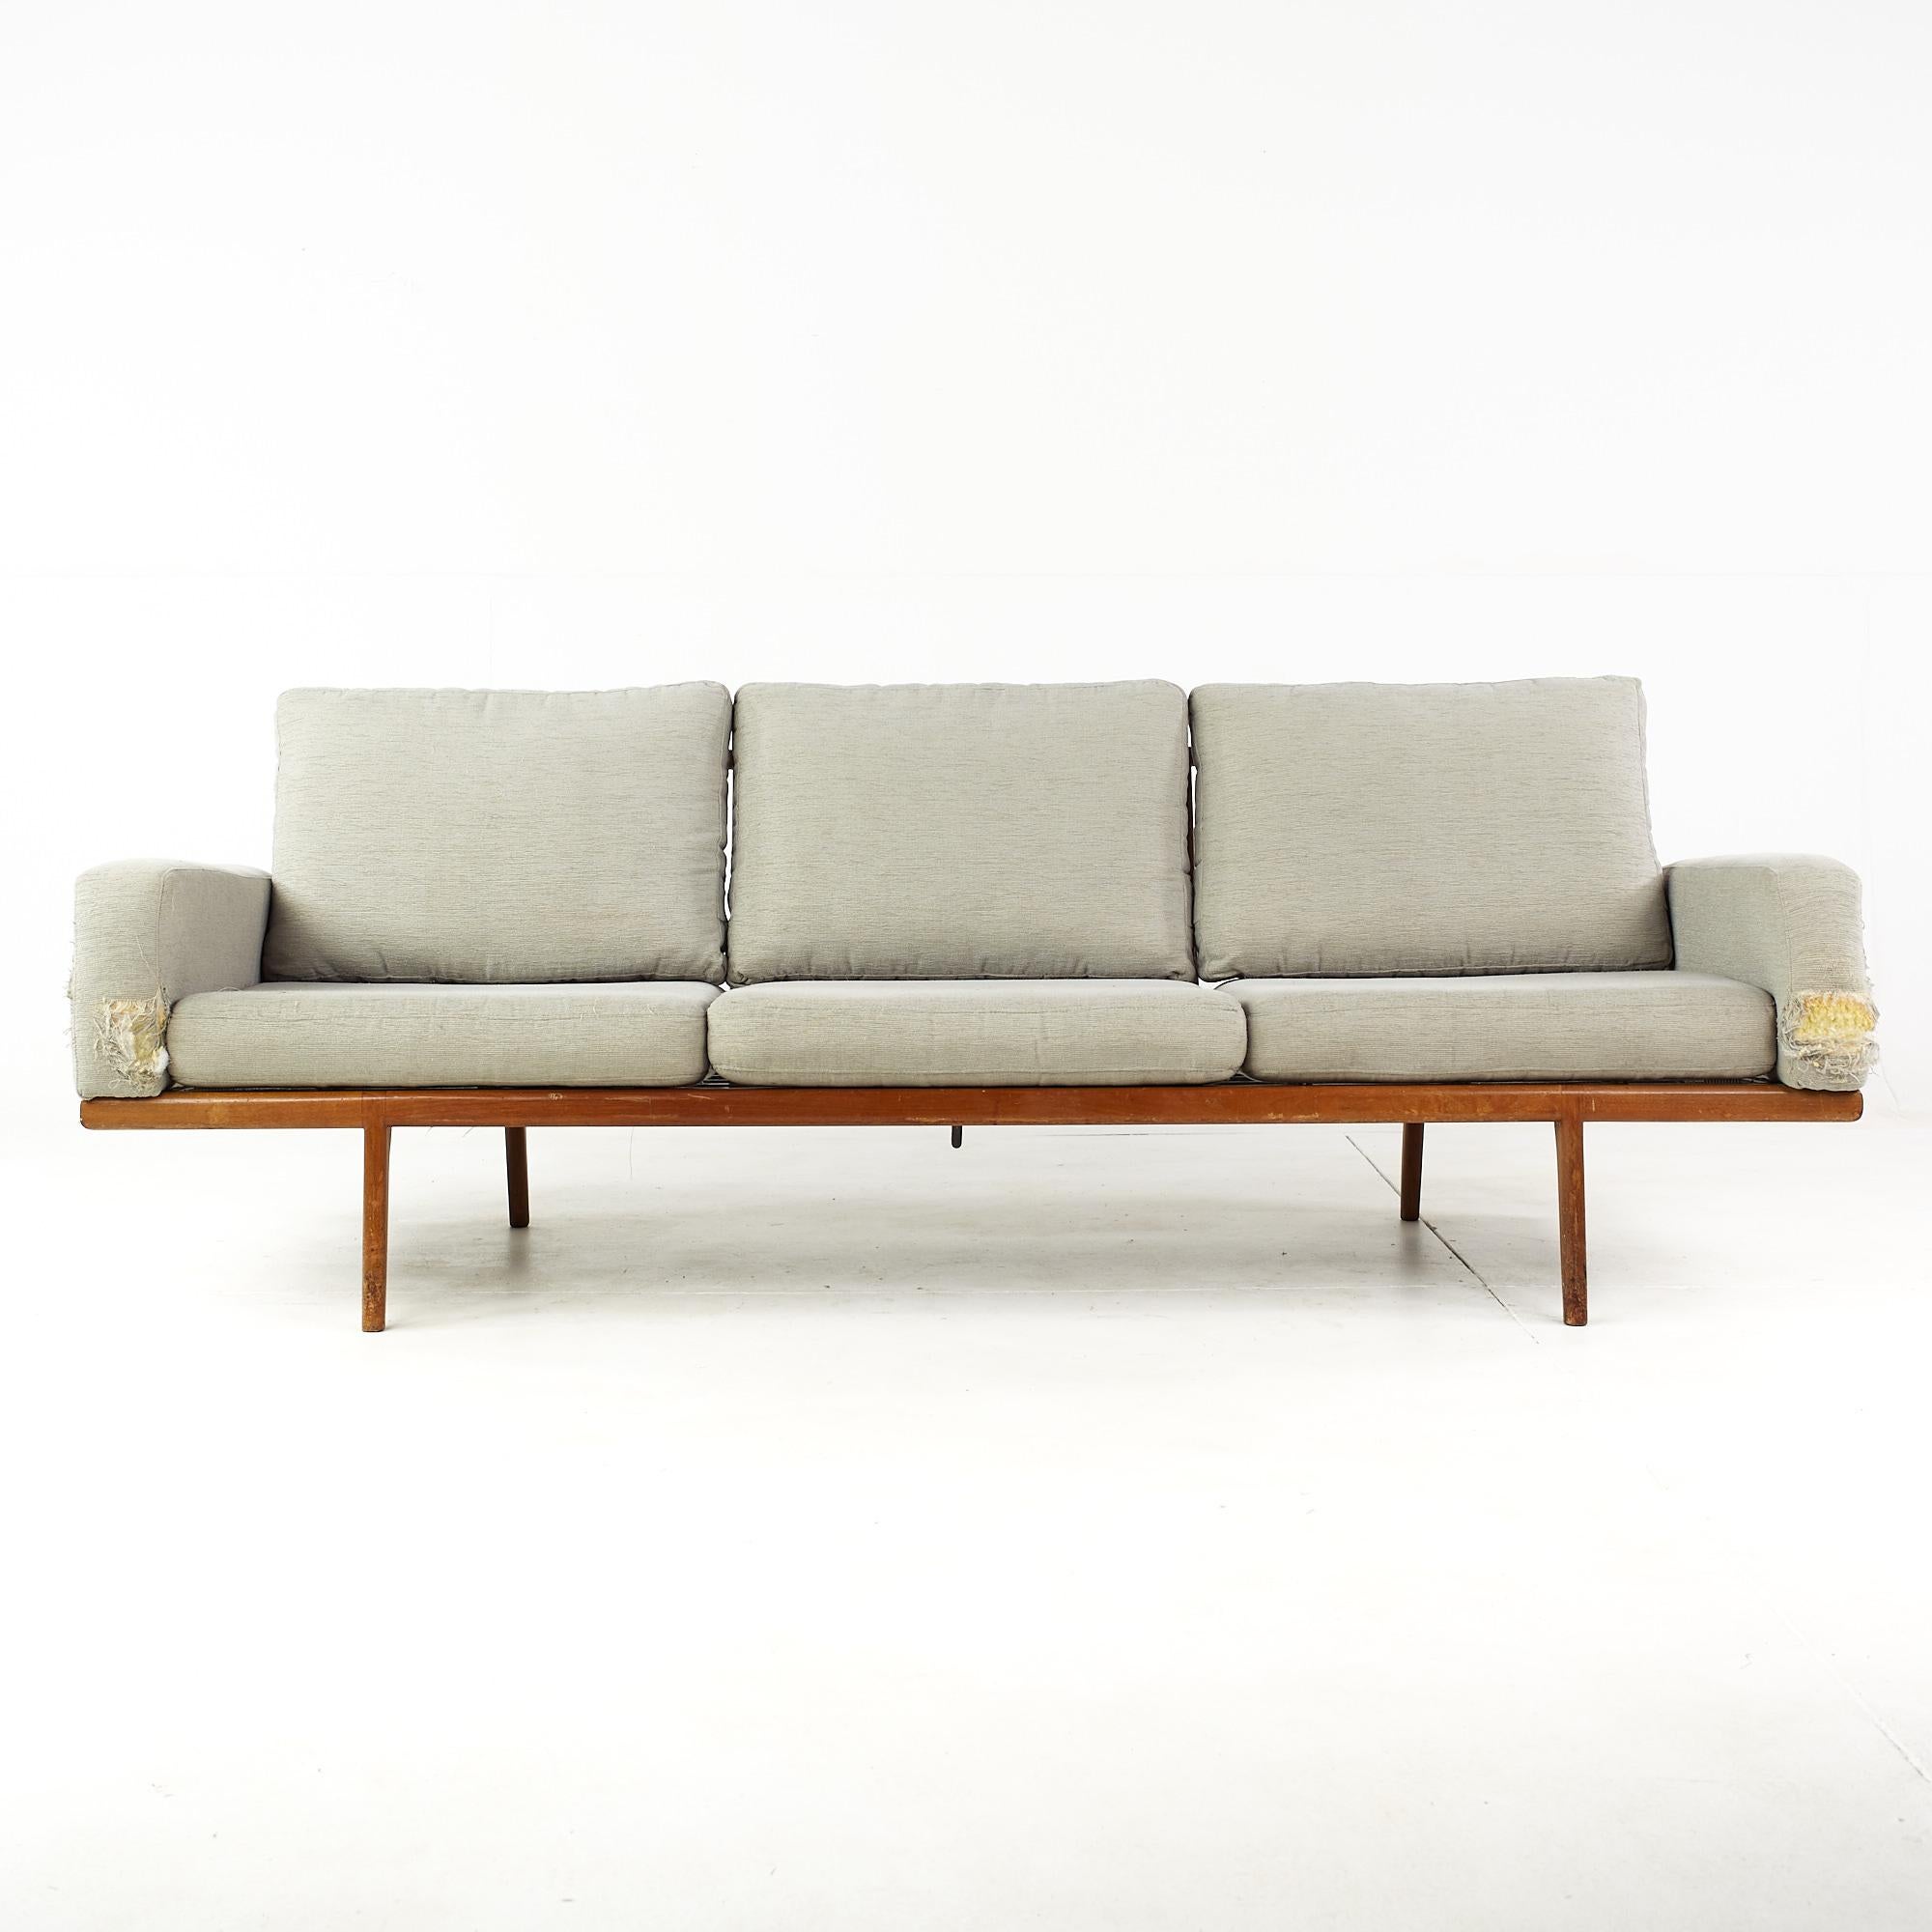 Mel Smilow mid century walnut rail back sofa.

This sofa measures: 83 wide x 31 deep x 29 inches high, with a seat height of 15 and arm height of 21 inches.

Ready for new upholstery. This service is available for an additional fee.

All